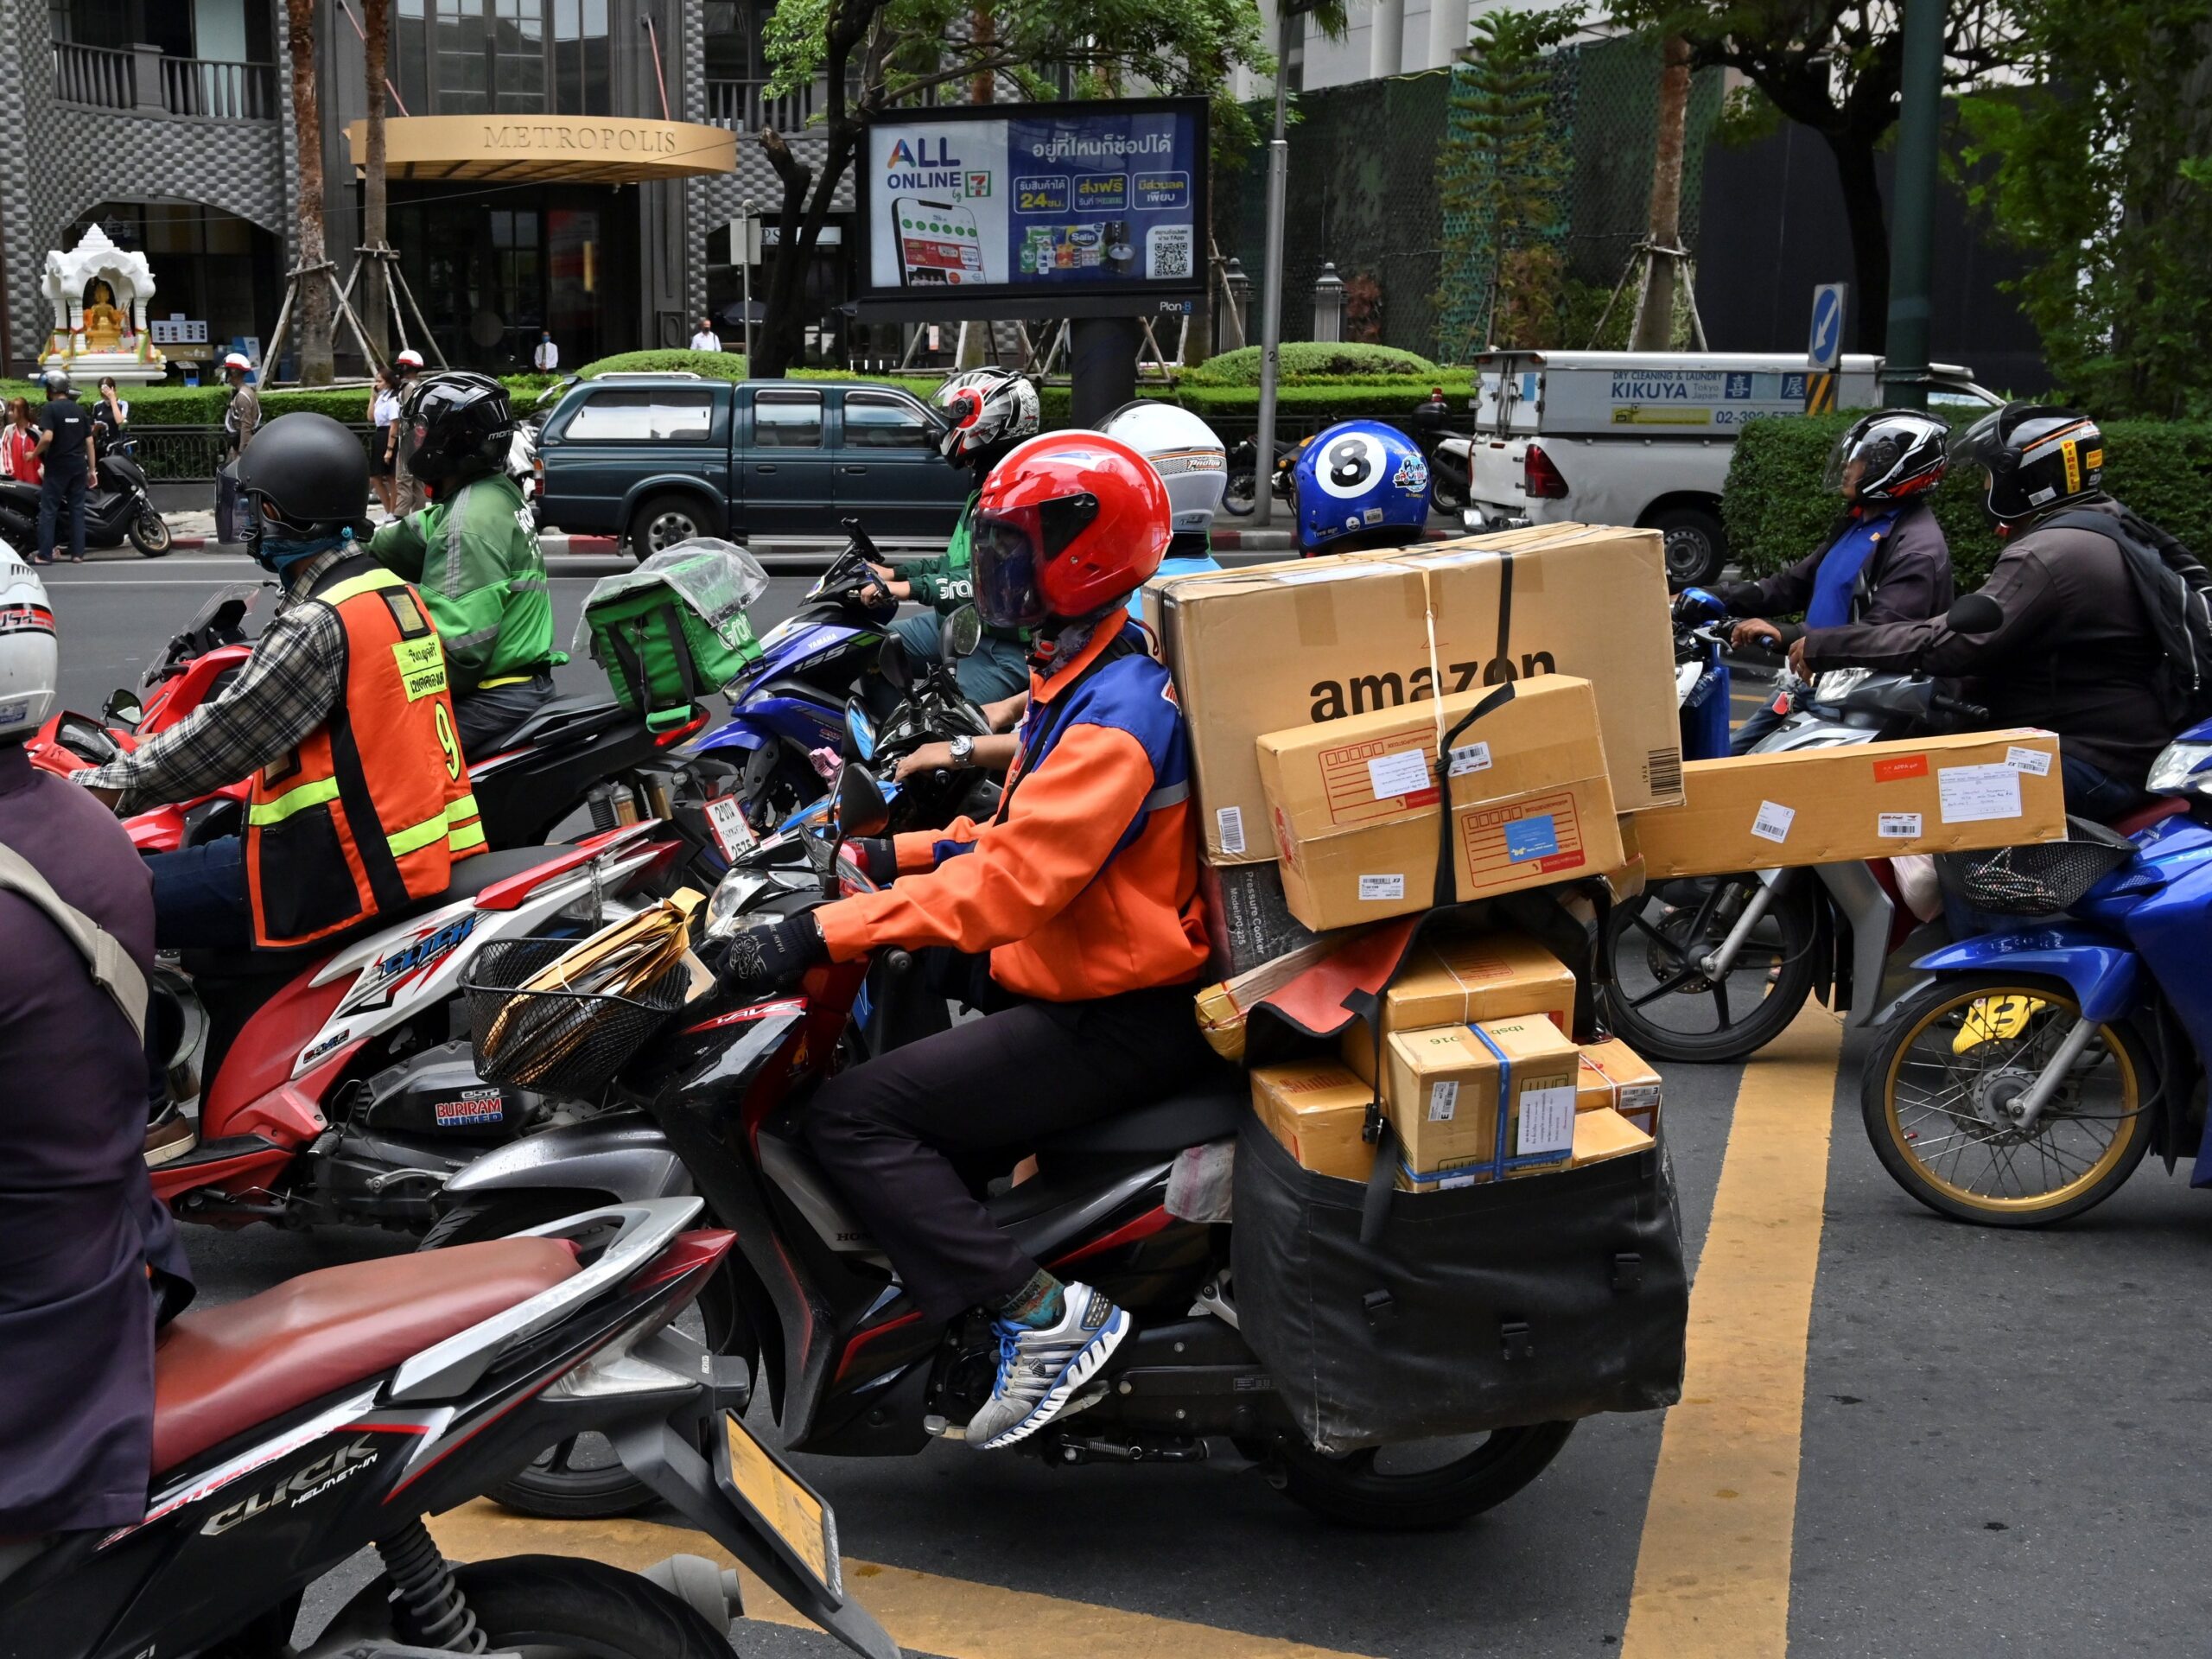 A man in a orange jacket and red helmet rides a motor bike. The back is stuffed with cardboard packages and one has the Amazon logo.